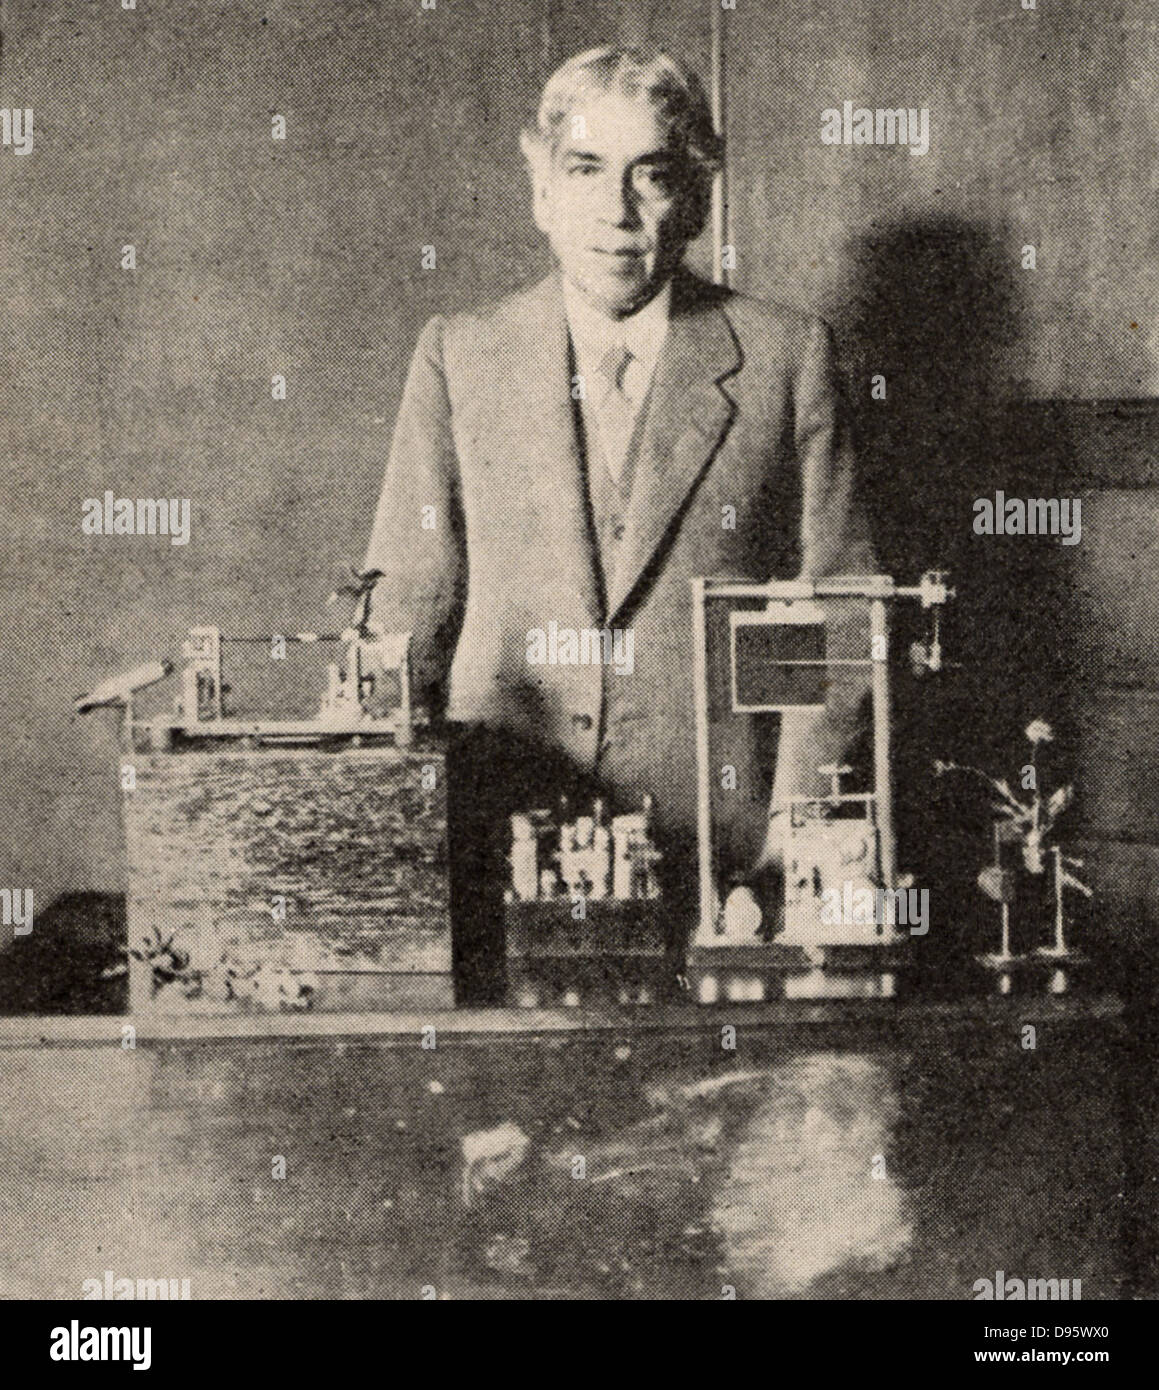 Jagadis Chandra Bose (1858-1937) Indian botanist and physicist, demonstrating electrical changes in plant stems (1926).  Halftone from a photograph. Stock Photo